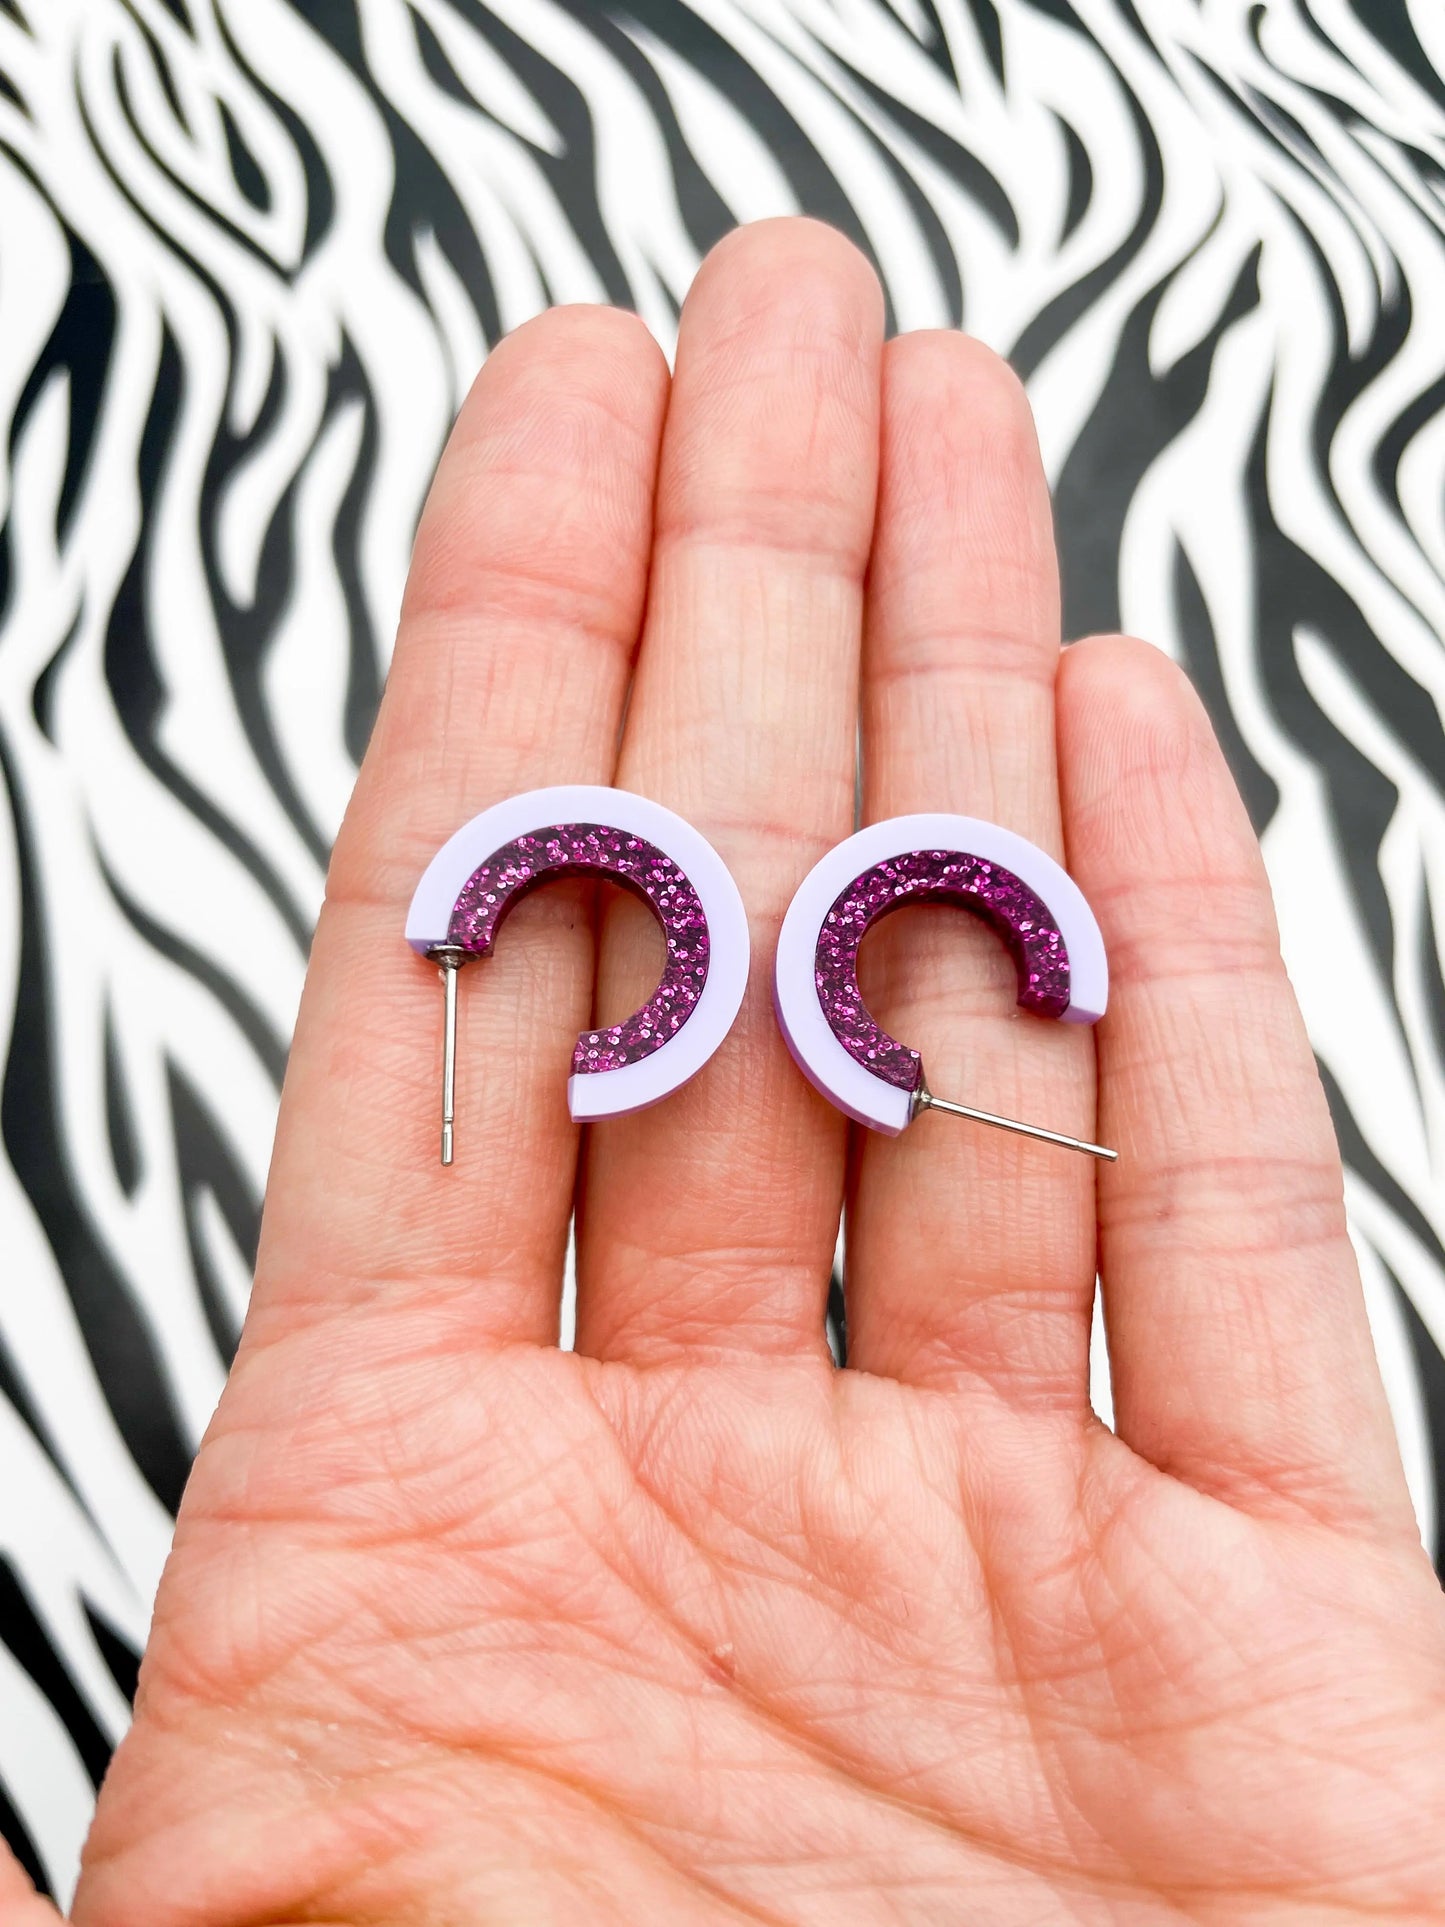 Pastel Lilac and Purple Glitter Striped Acrylic Hoops from Sapphire Frills